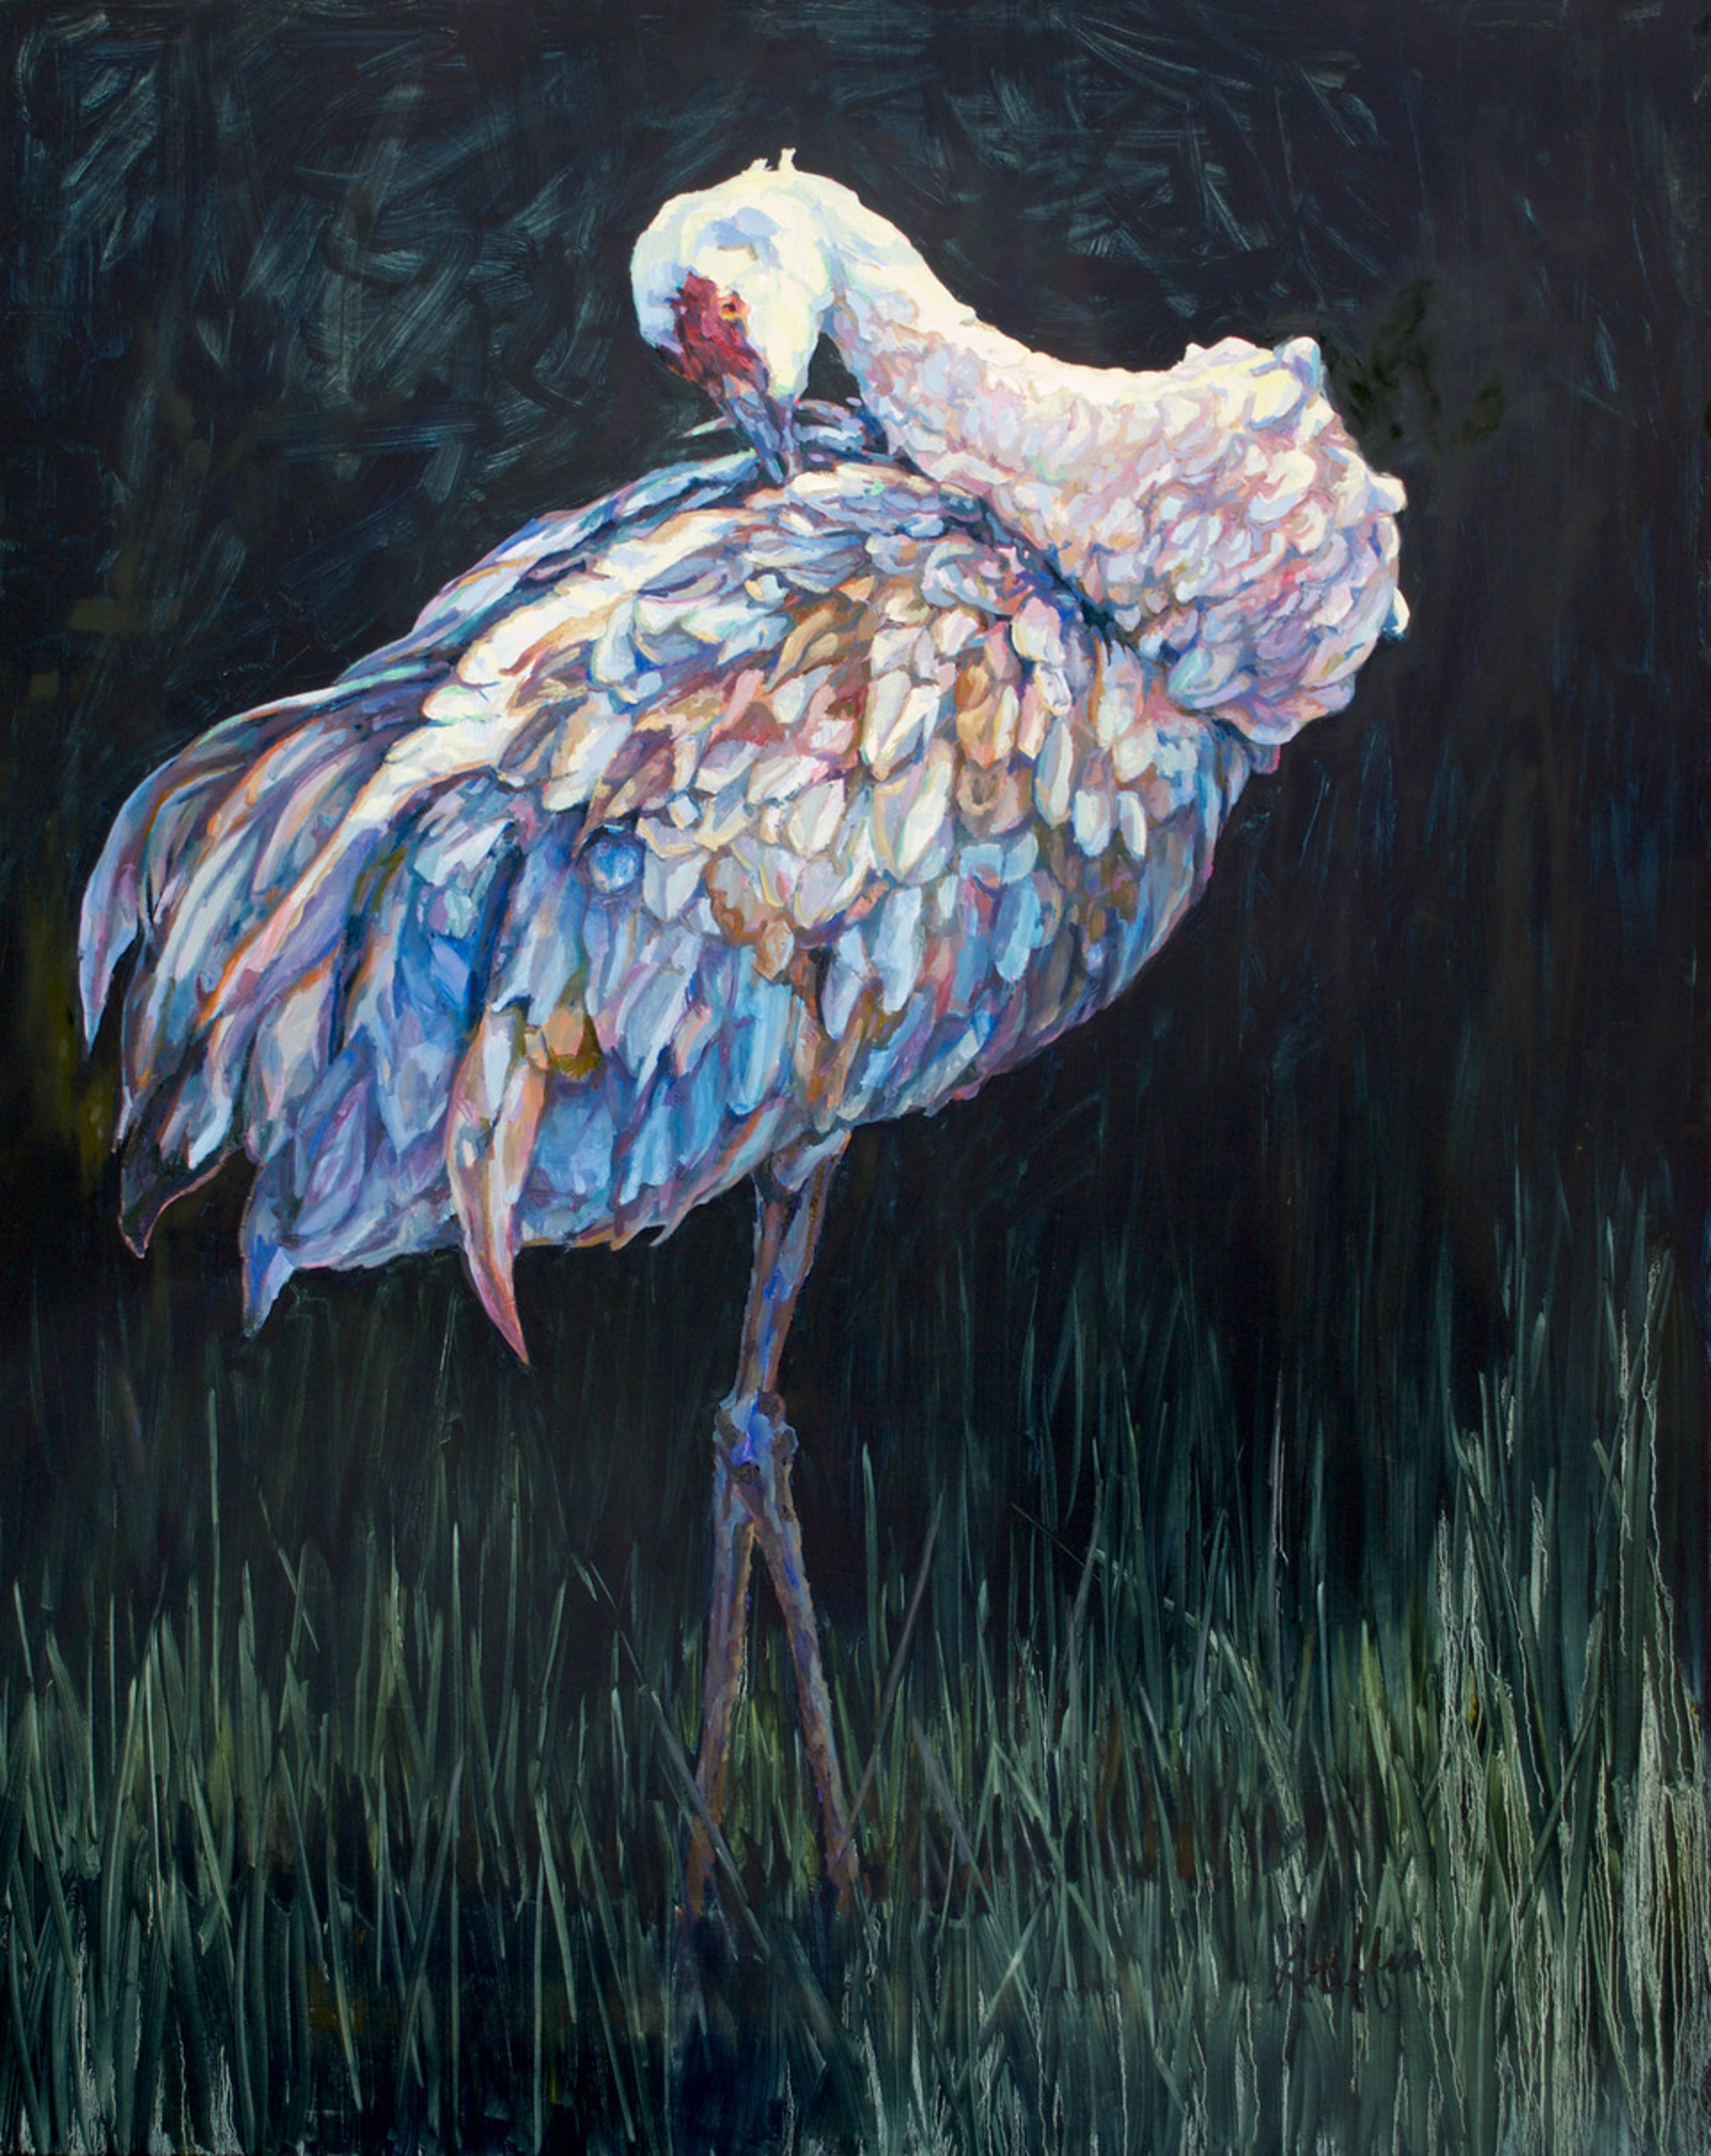 Patricia Griffin White Crane Portrait In Oil On Linen, A Contemporary Fine Art Painting And Modern Wildlife Art Piece Available At Gallery Wild